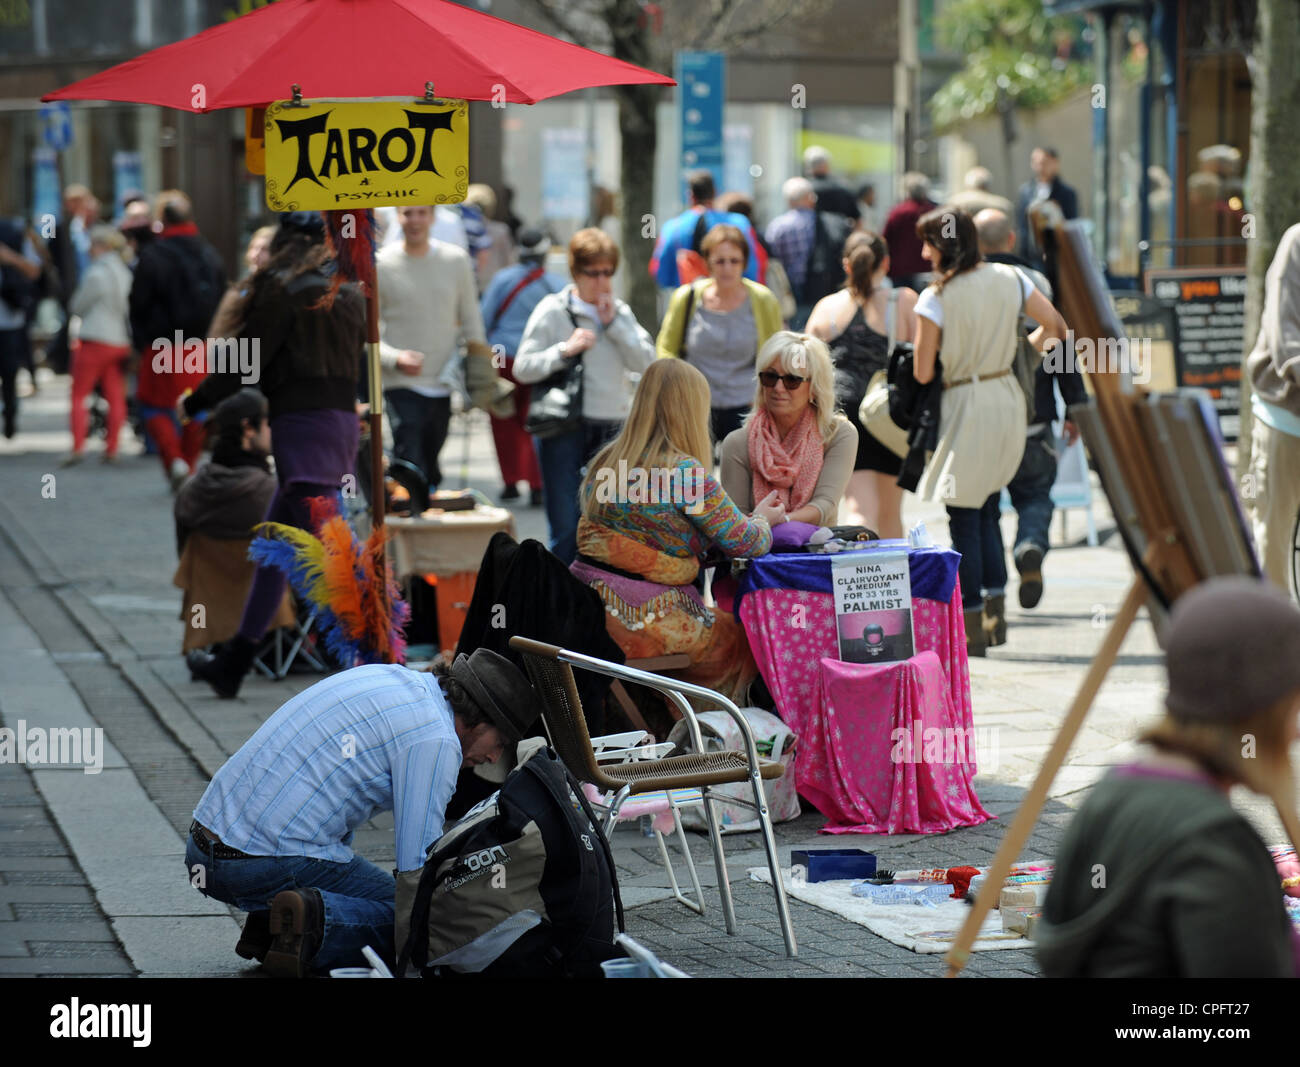 Tarot reading stall in the fashionable East Street shopping area of Brighton Sussex UK Stock Photo